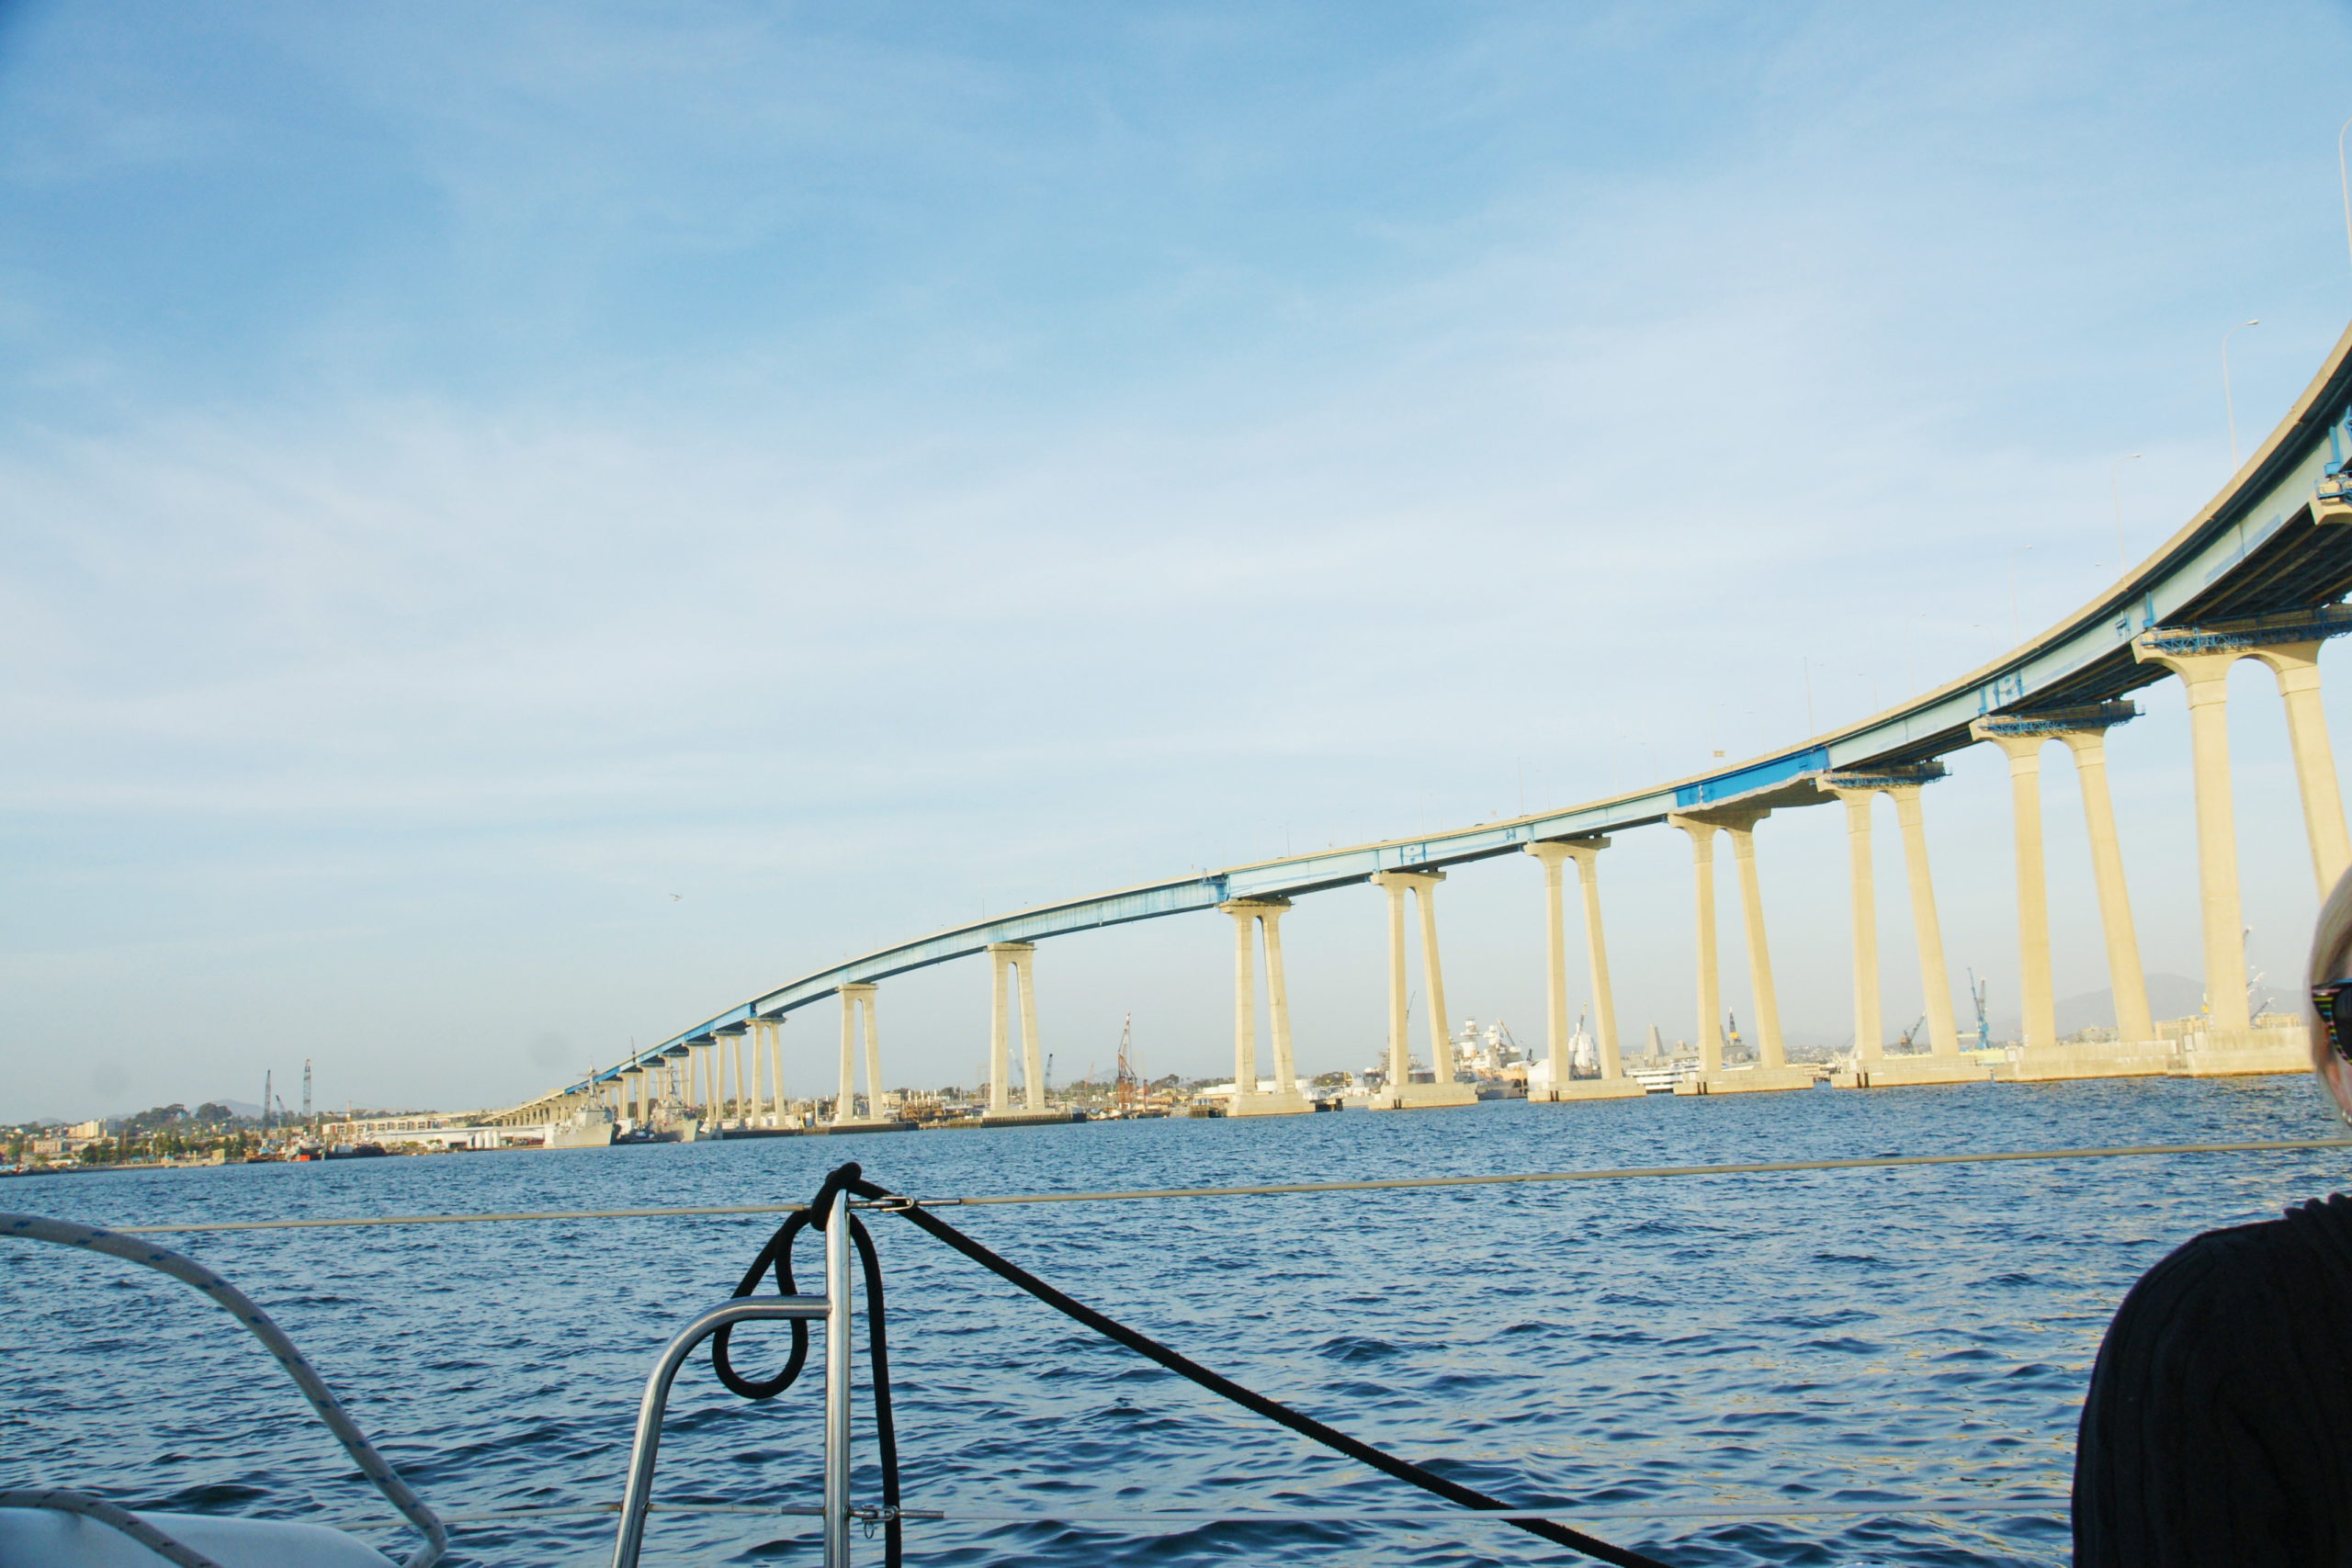 A view of the bridge from a boat.